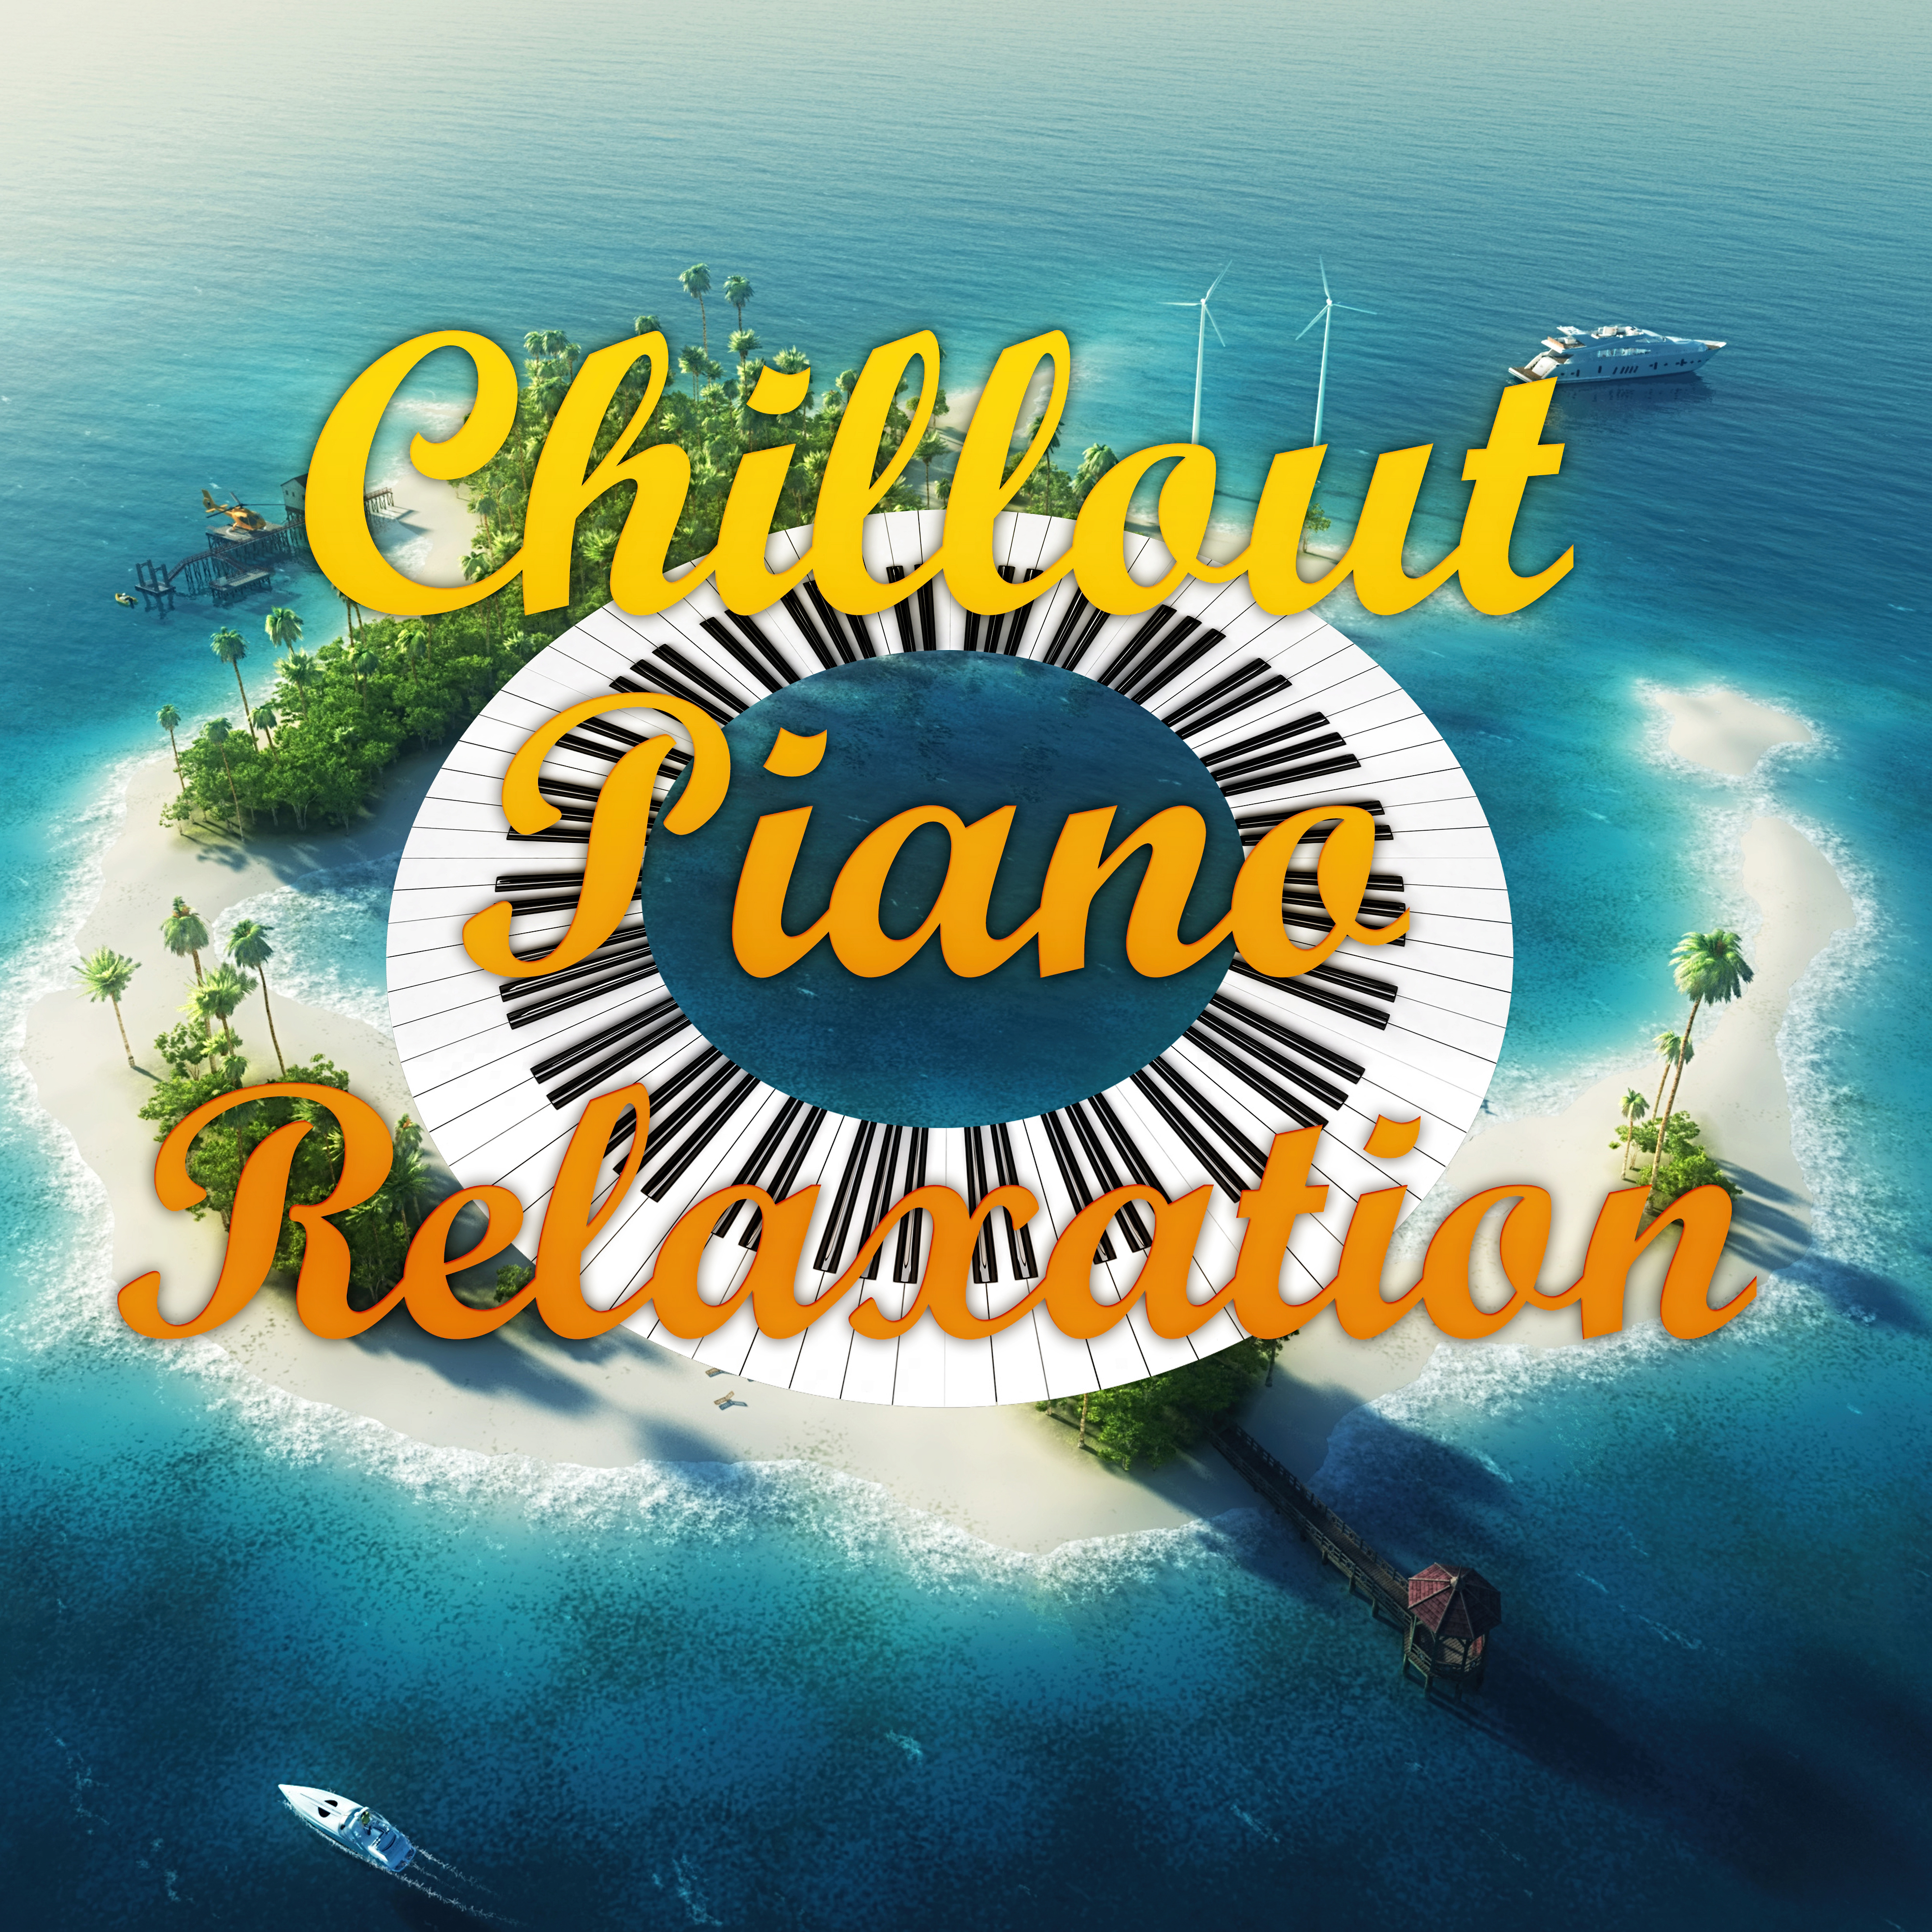 Chillout Piano Relaxation  Total Relax, Easy Listening, Piano Music, Well Being, Good Mood, My Time, Positive Energy, Body Harmony